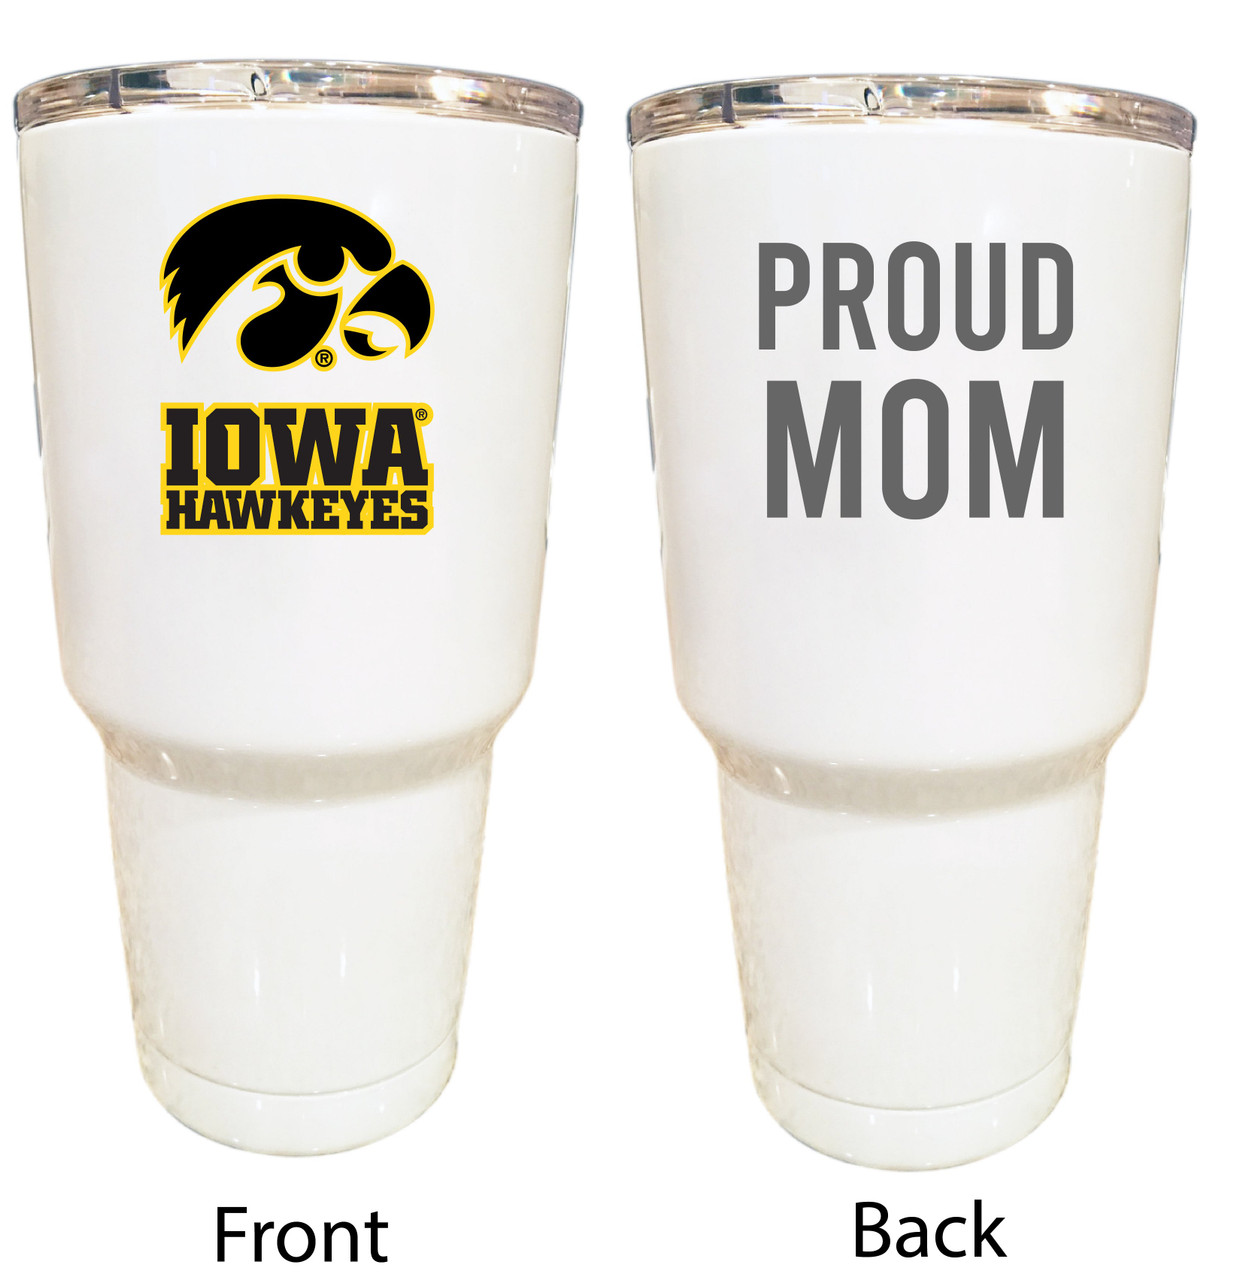 Iowa Hawkeyes Proud Mom 24 oz Insulated Stainless Steel Tumblers Choose Your Color.